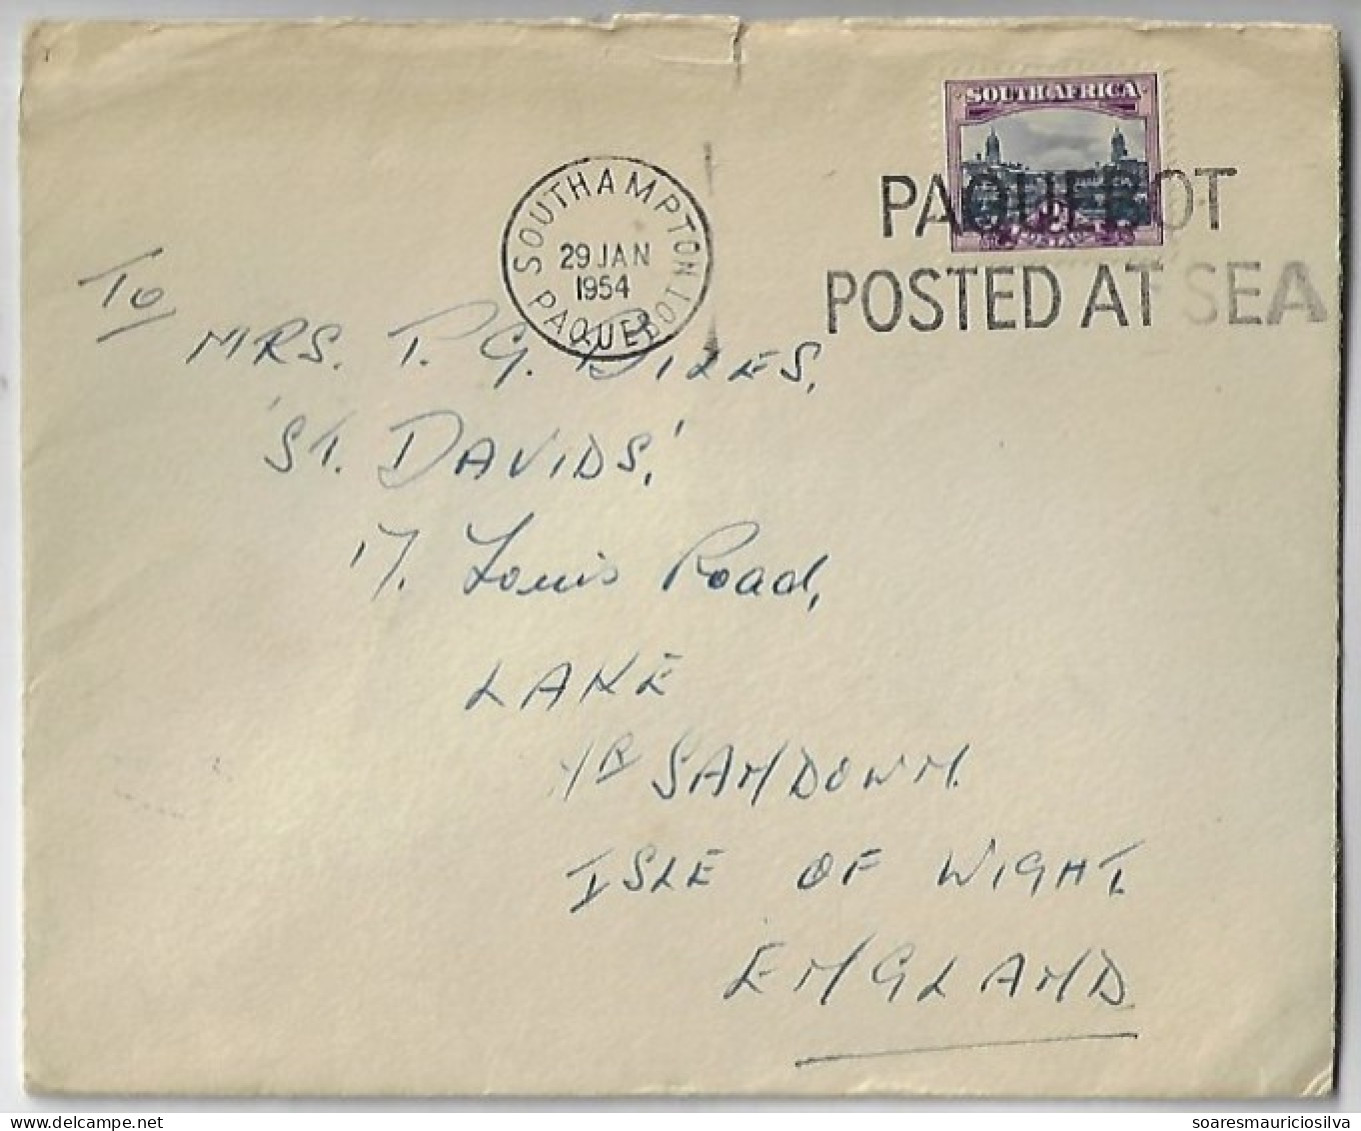 South Africa 1954 Union-Castle Line Cover Cancel Southampton Paquebot Posted At Sea Addressed To Great Britain - Cartas